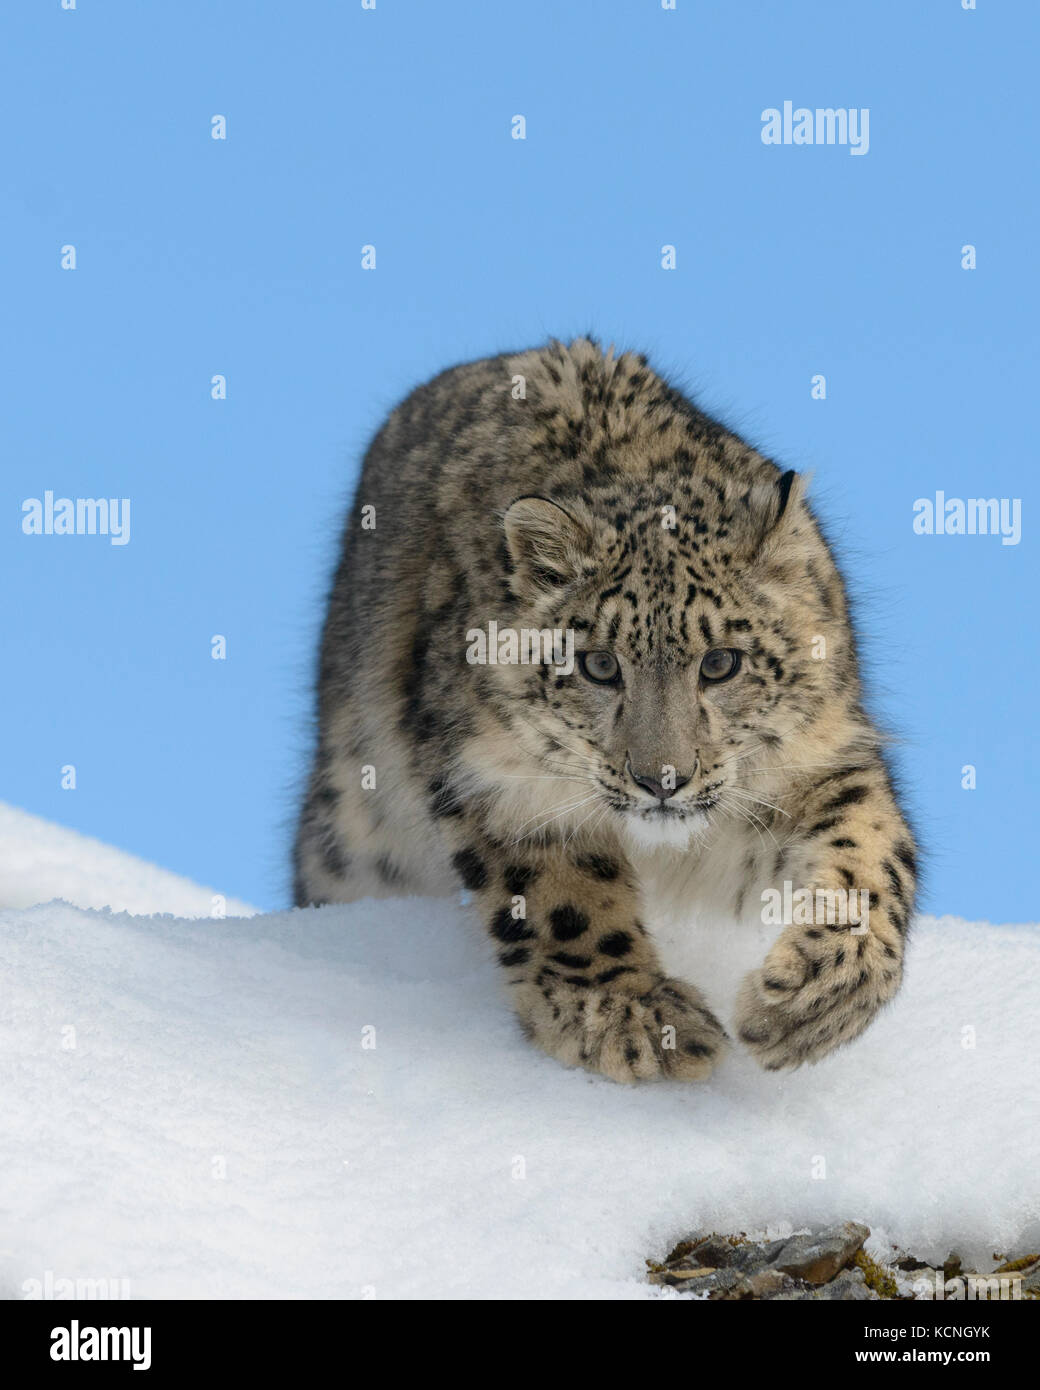 Snow Leopard, Panthera uncia, in snow and rocks. Endangered species. Captive animal. Stock Photo